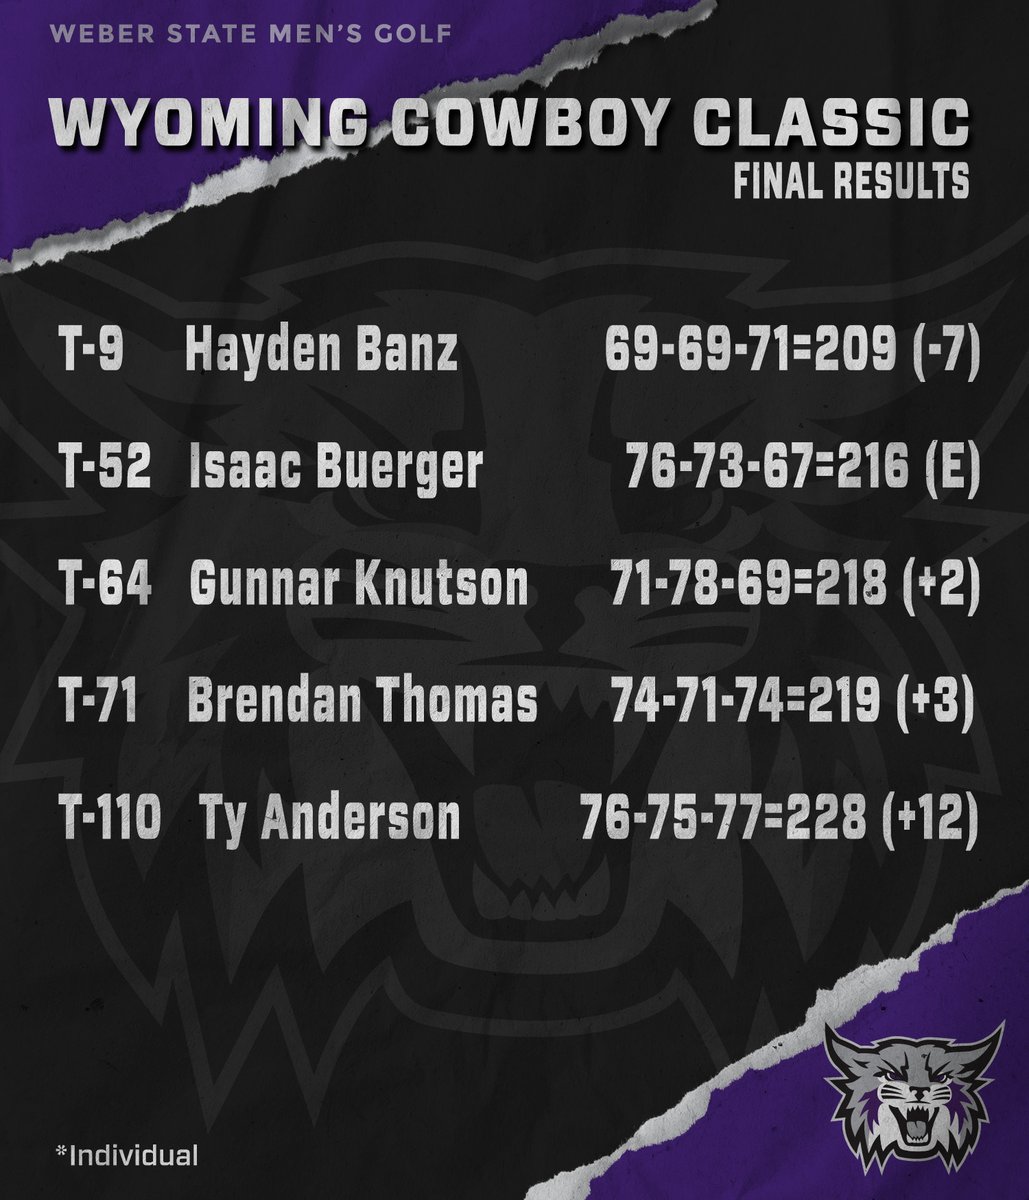 The Wildcats close strong with a -7 final round to finish 13th at the Cowboy Classic. Hayden Banz (T9th, -7) led the team for the week, while Isaac Buerger led the final day run with a 5-under 67. bit.ly/3vsDicN #WeAreWeber